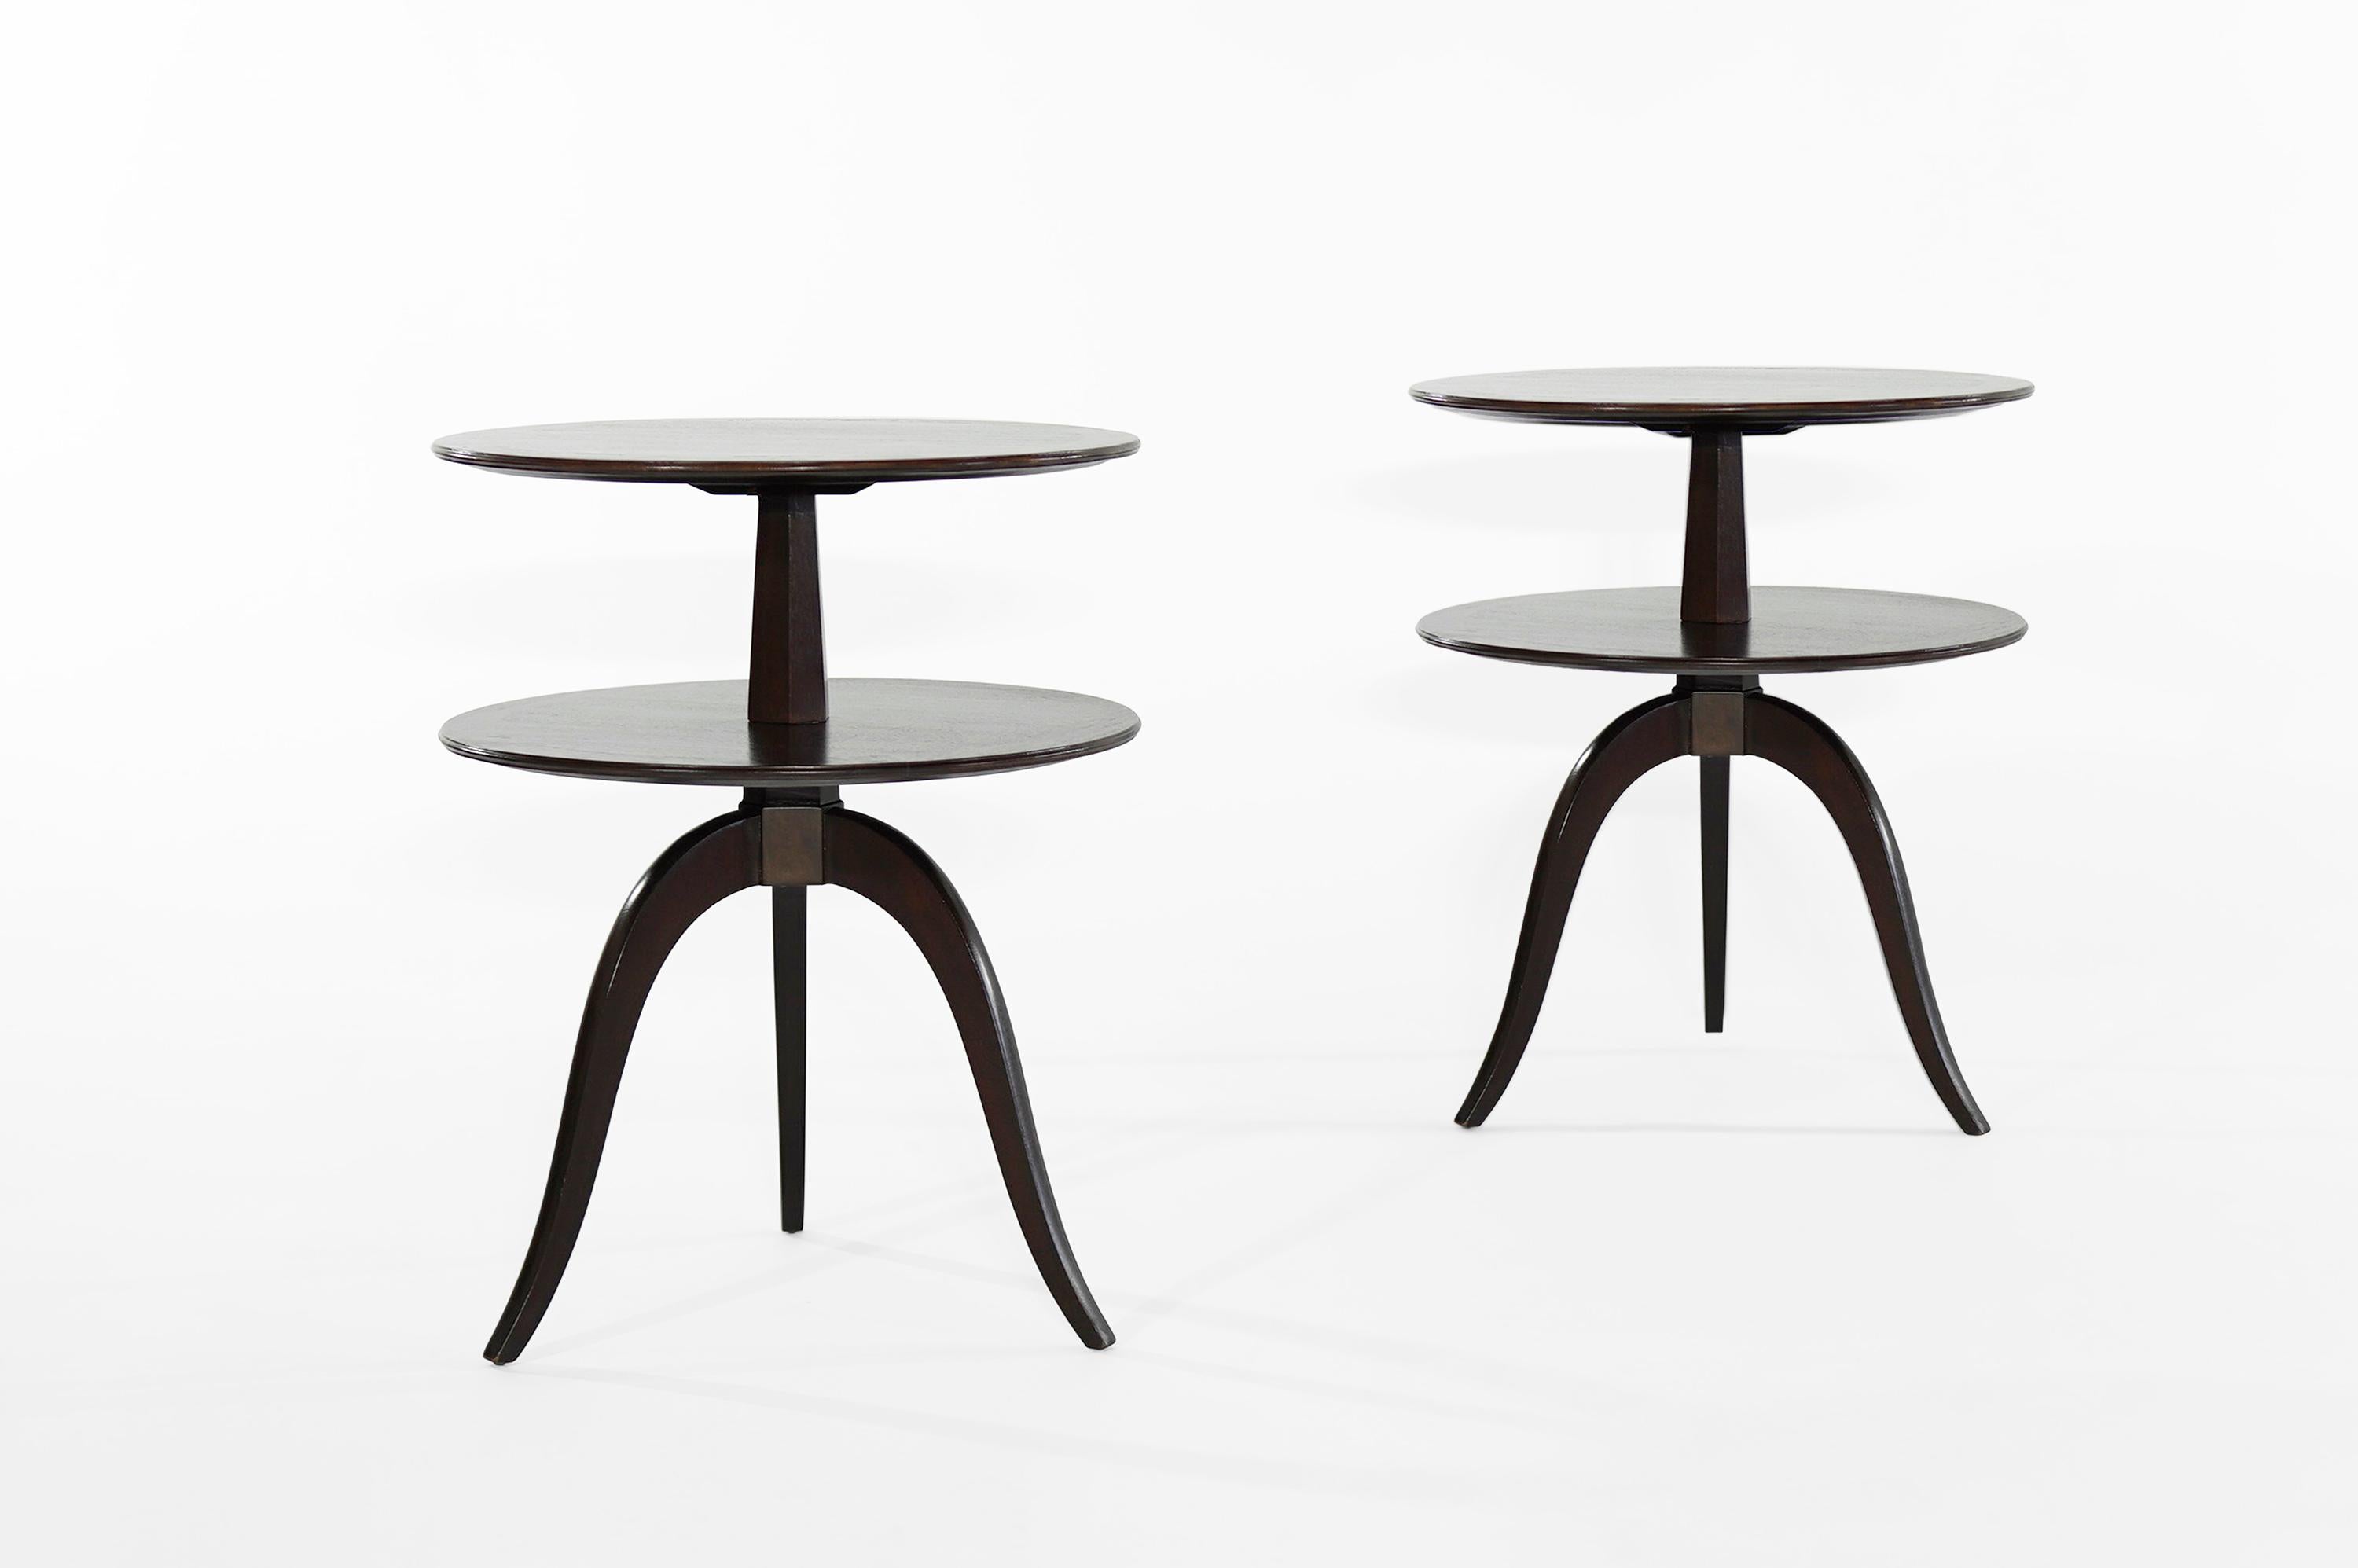 American Set of Side Tables by Paul Frankl for Brown Saltman, circa 1950s